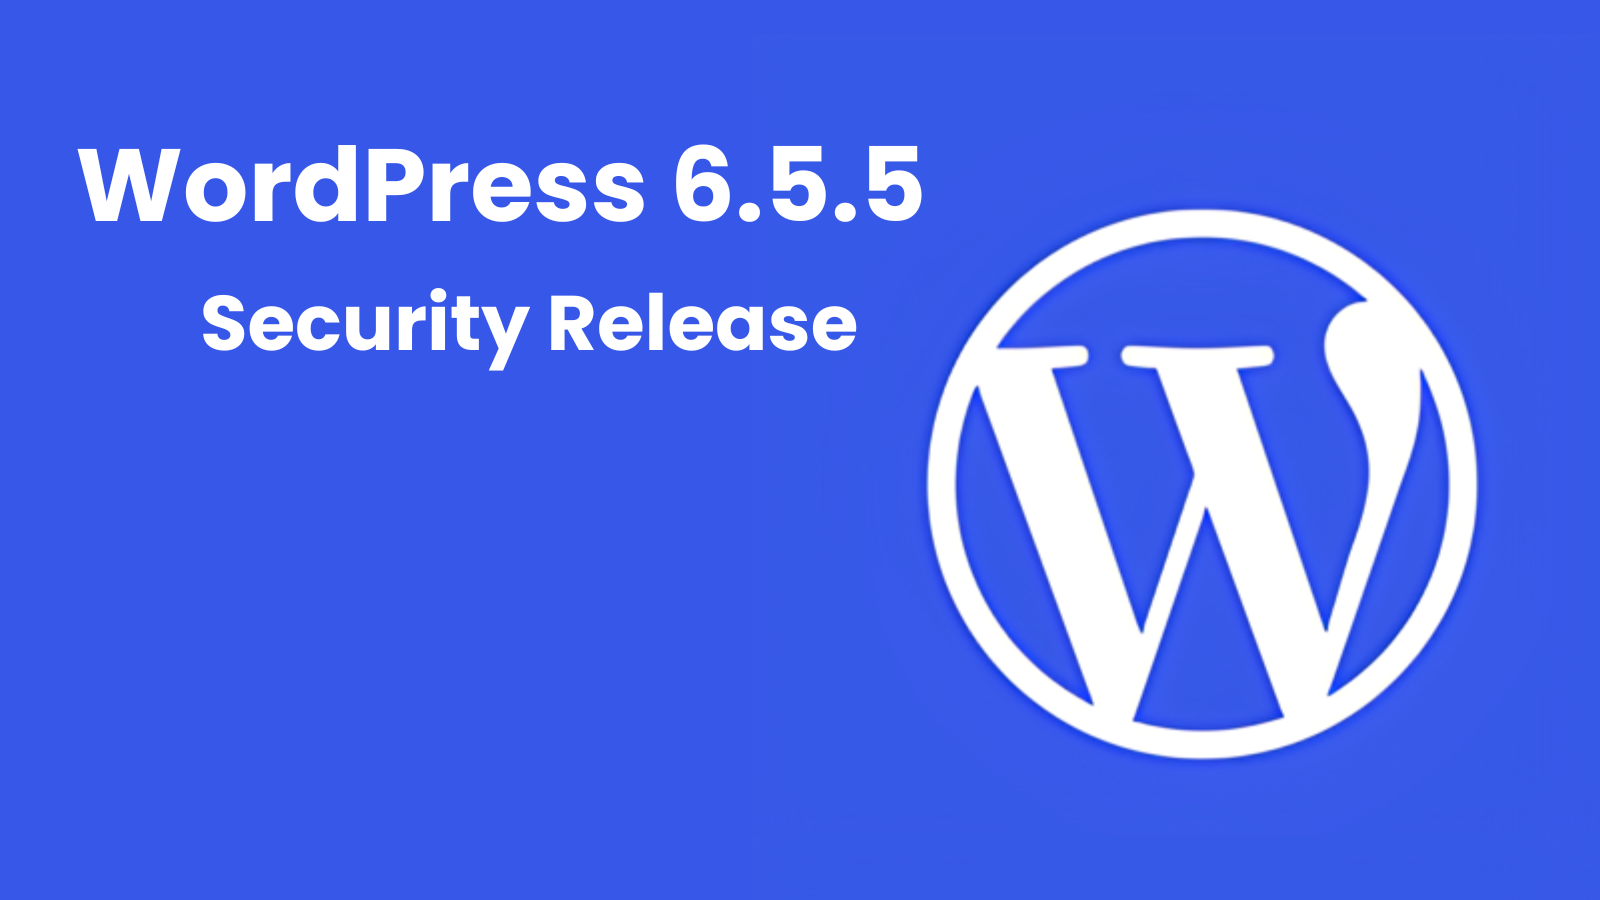 WordPress Releases Urgent Security Update to Patch XSS and Path Traversal Flaws